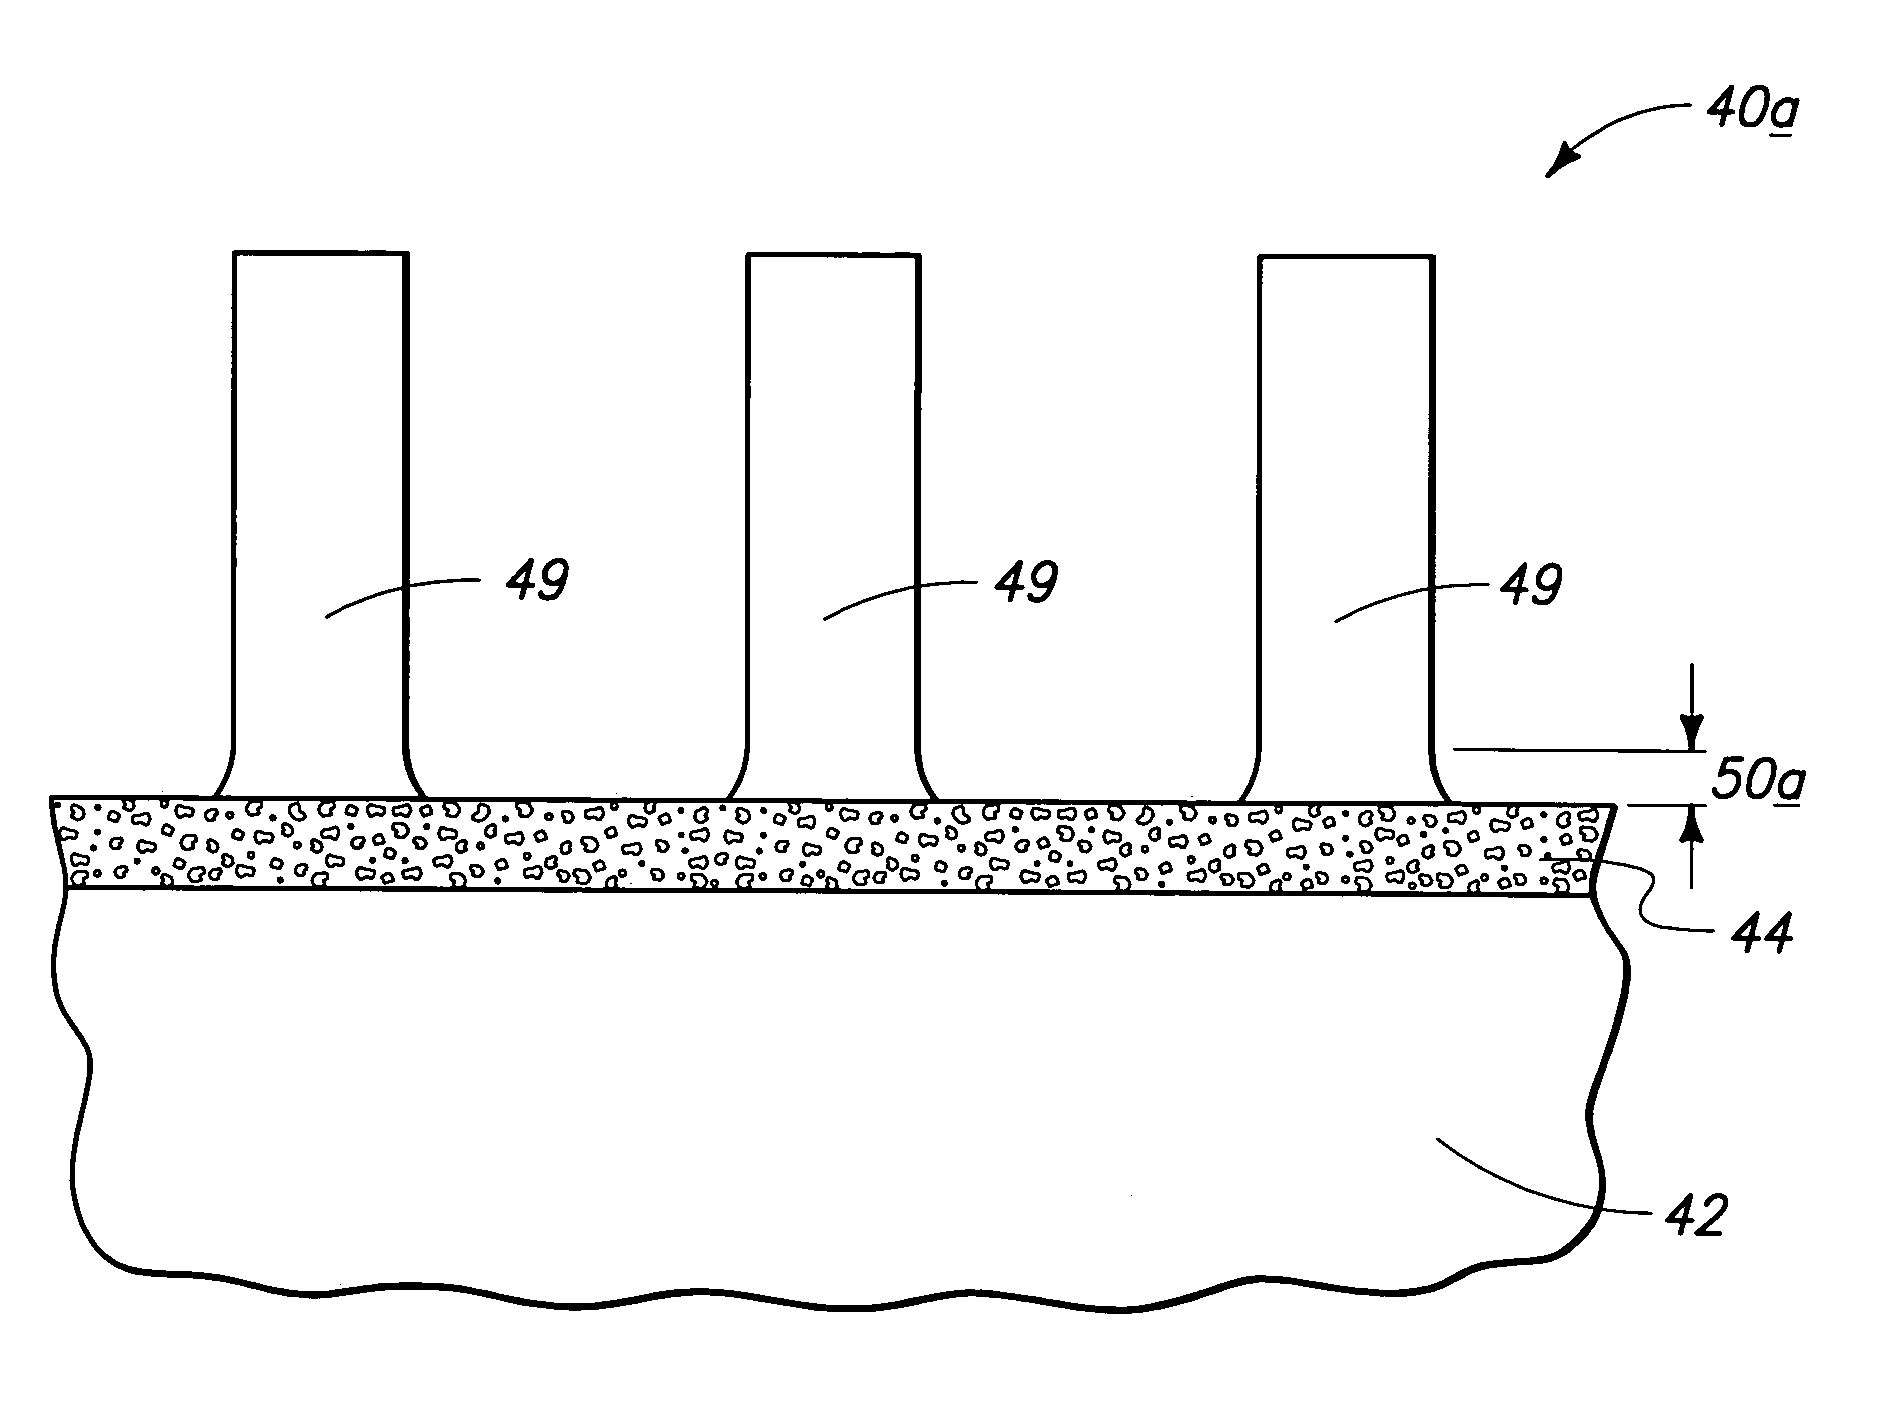 Methods of forming patterned photoresist layers over semiconductor substrates